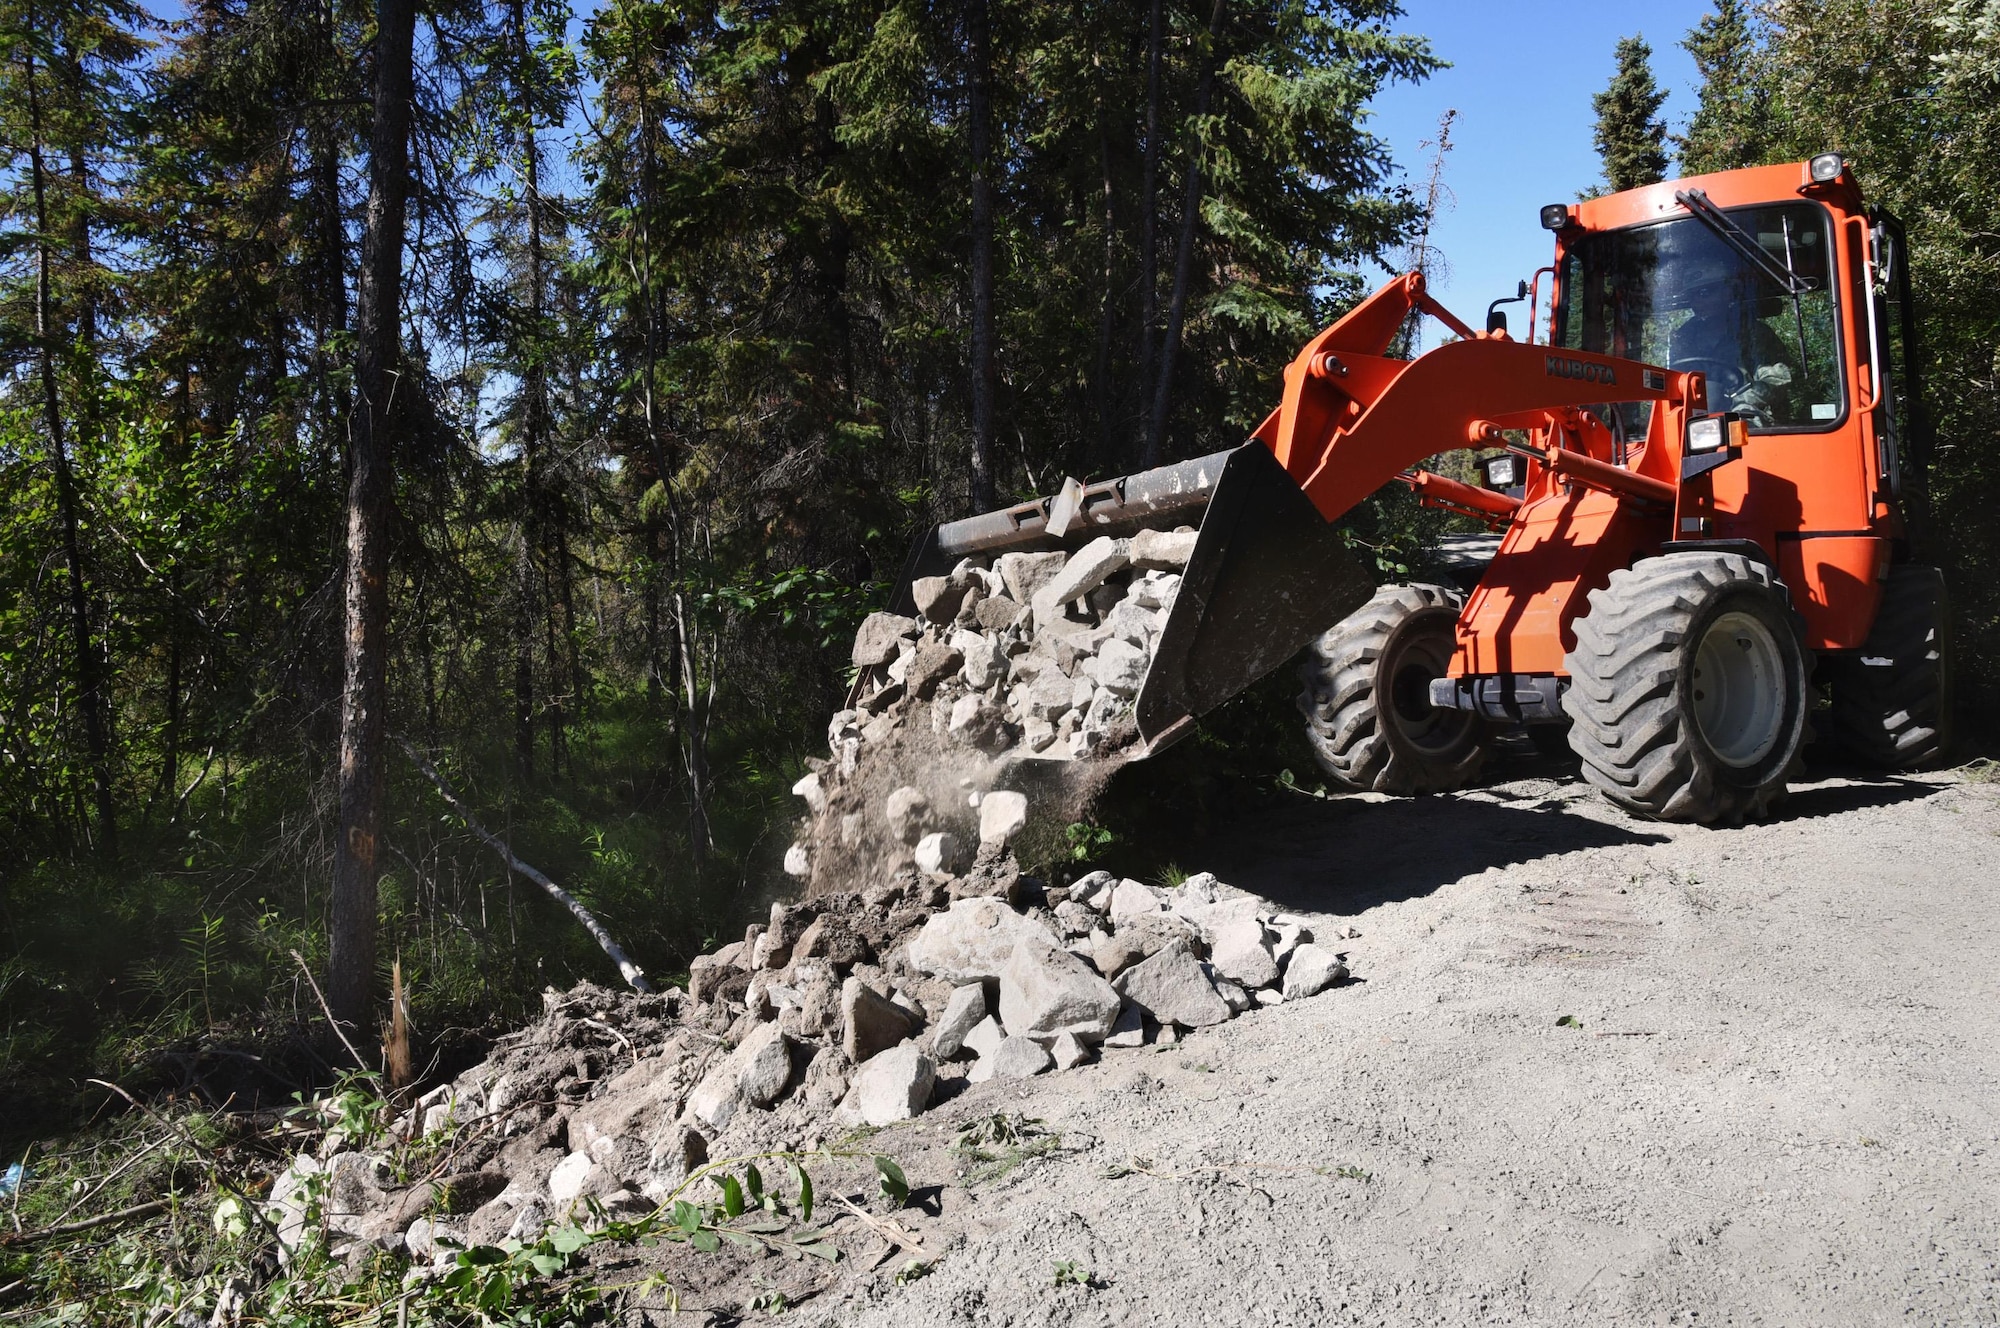 Oregon Air National Guard Senior Airman Andrew Wolf, assigned to the 142nd Fighter Wing Civil Engineers (CES) uses a front end loader to transport rock and gravel to the Nivan Lake Trail at Yellowknife, Northwest Territories, Canada, July 18, 2017. The CES members are spending two-weeks in Canada working on a variety of projects during their Deployment for Training (DFT). (U.S. Air National Guard photo/Master Sgt. John Hughel, 142nd Fighter Wing Public Affairs)